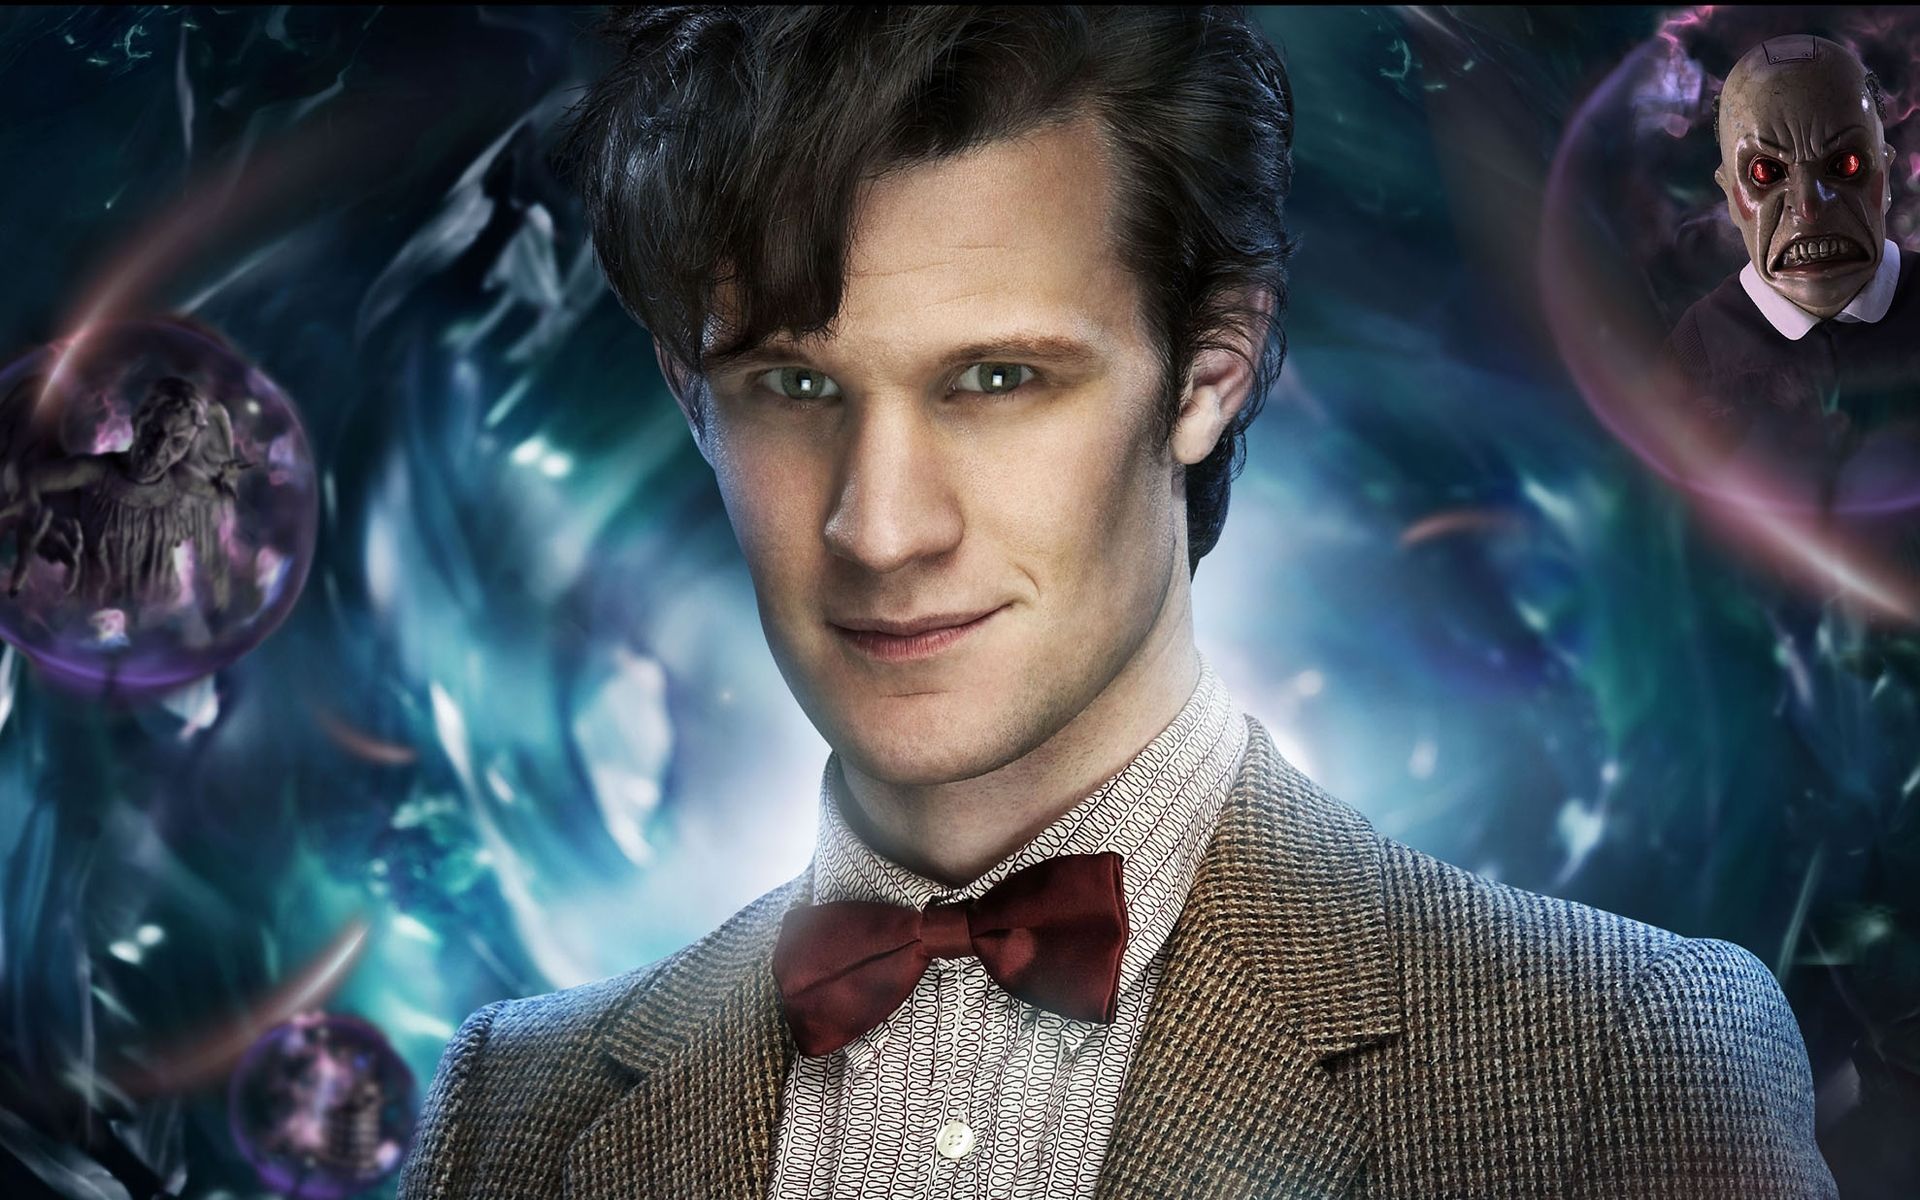 Doctor Who Matt Smith Search These Members Groups Posts Home